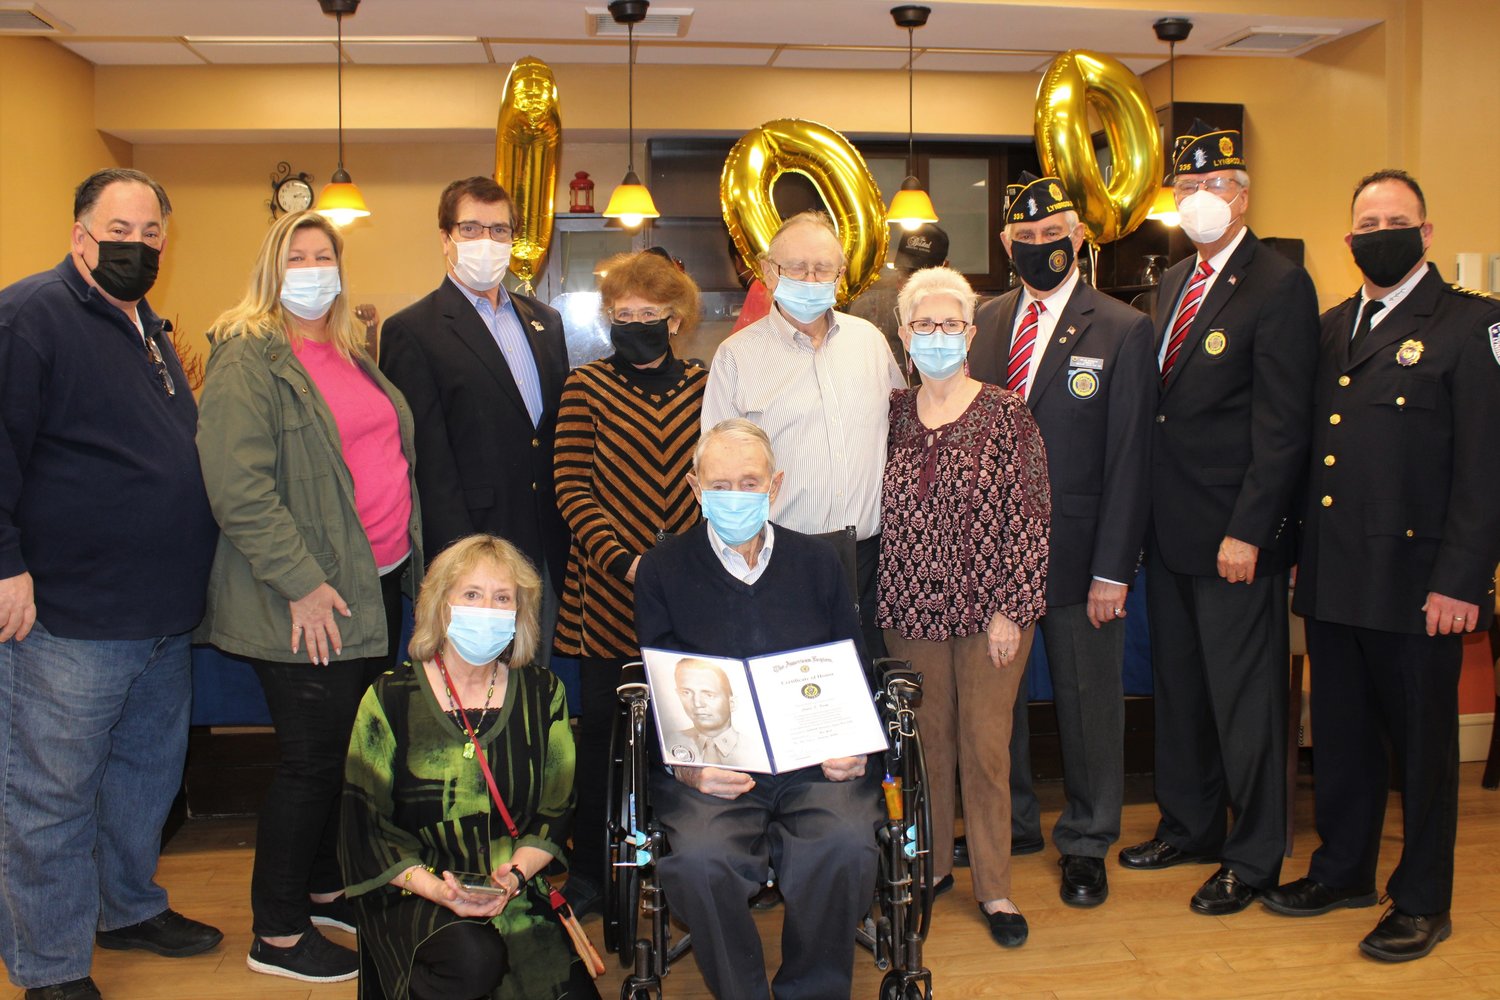 Veterans and elected officials gathered to celebrate the 100th birthday of retired U.S. Marine Col. James S. Knap.